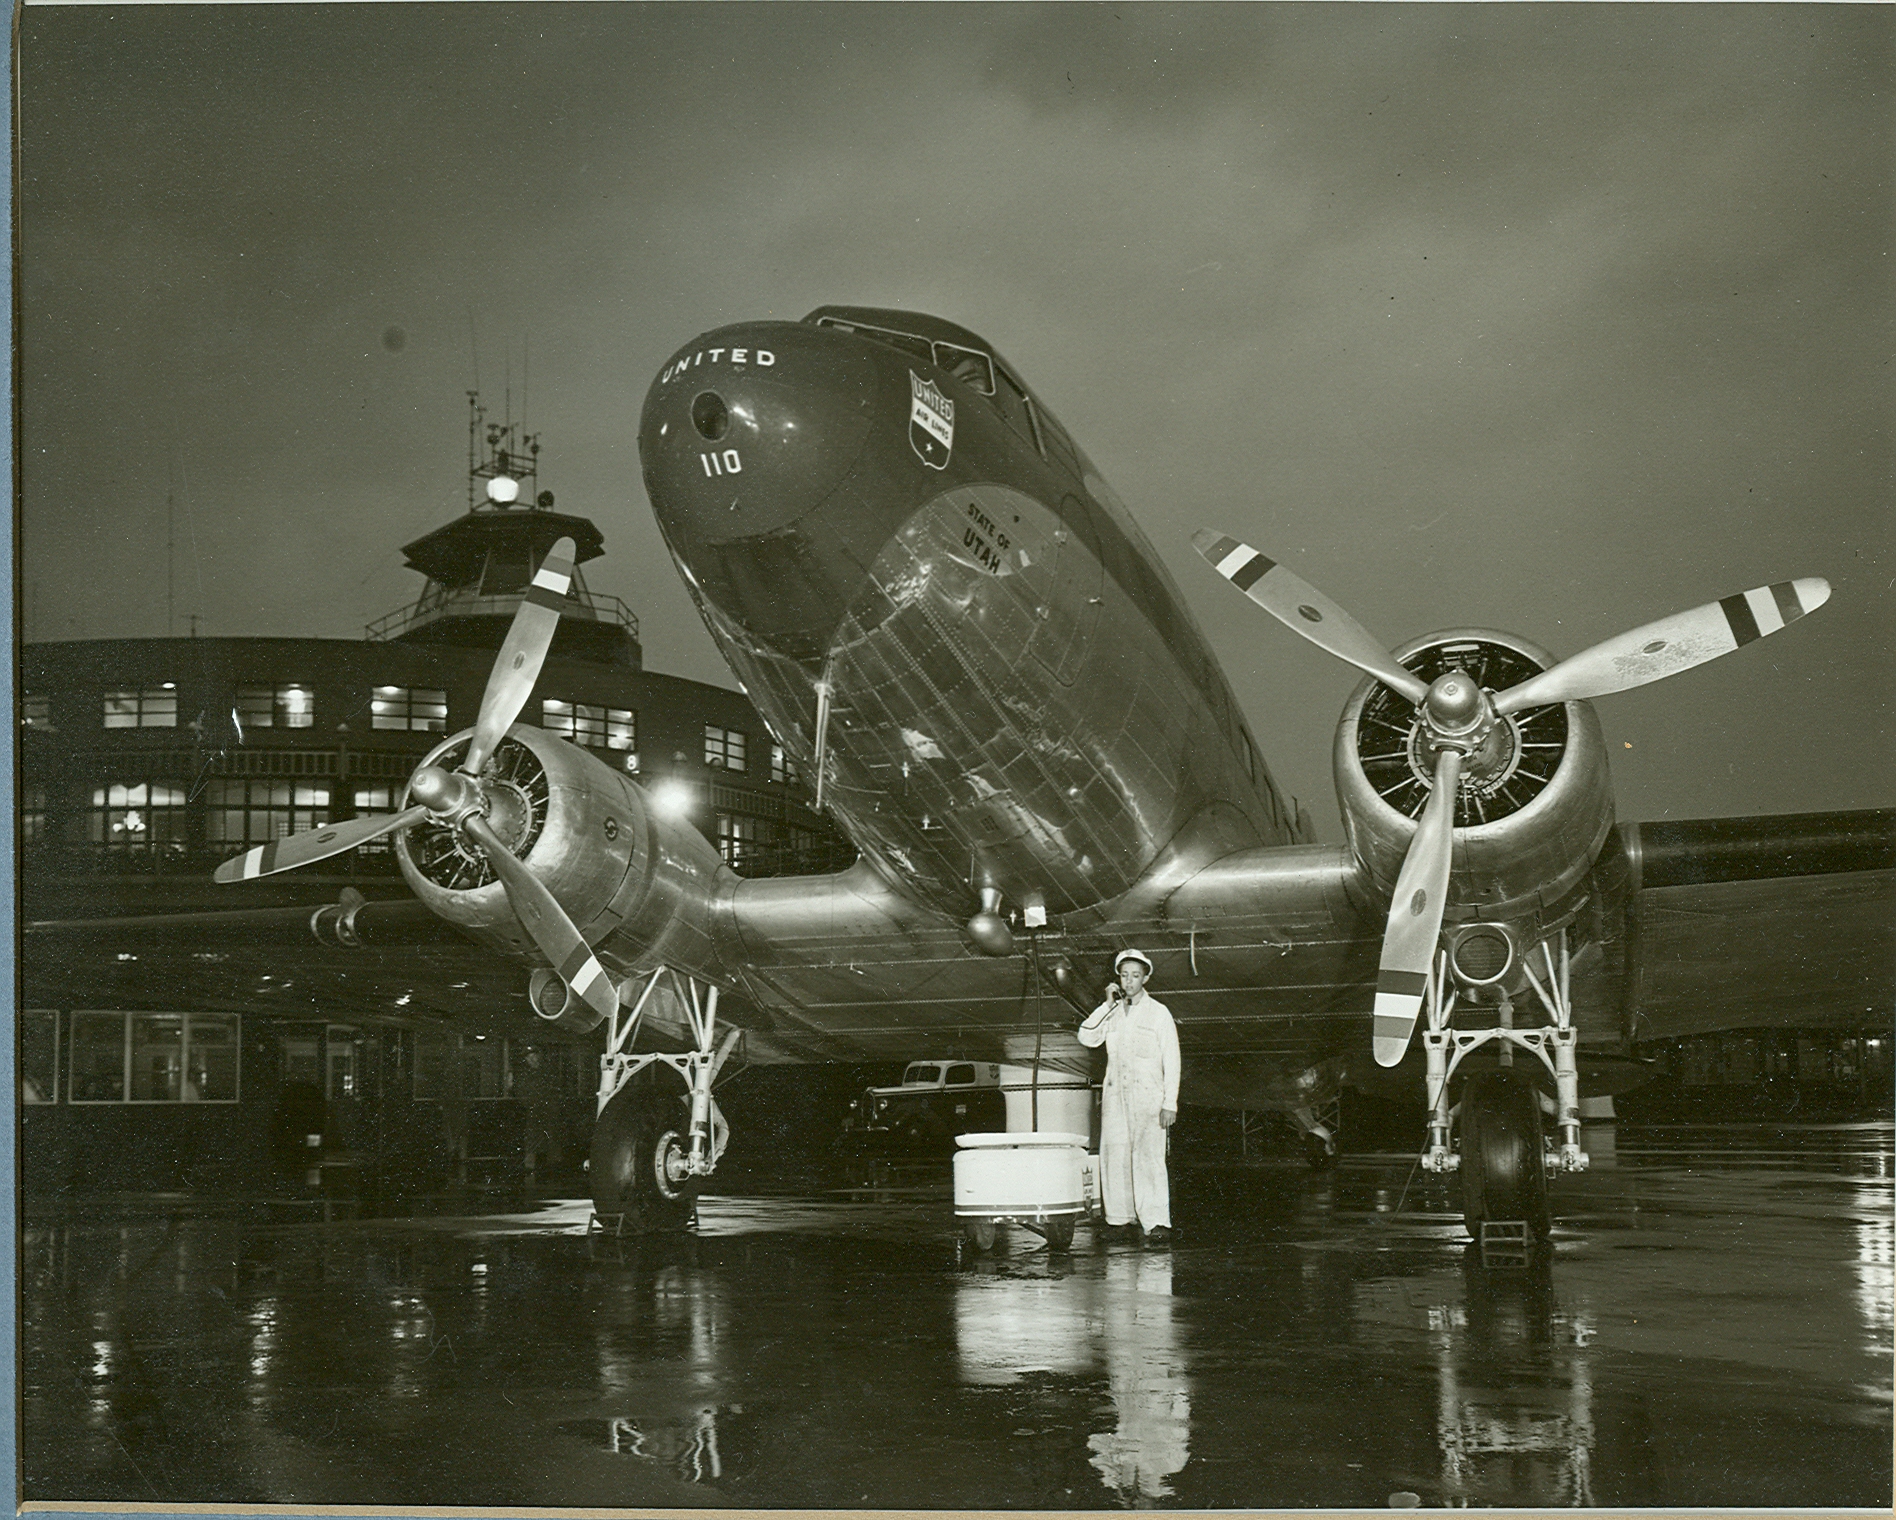 La Guardia Airport in 1940 as photographed by Leslie Zirkelbach of Bloomfield, New Jersey. United Airlines. View full size.